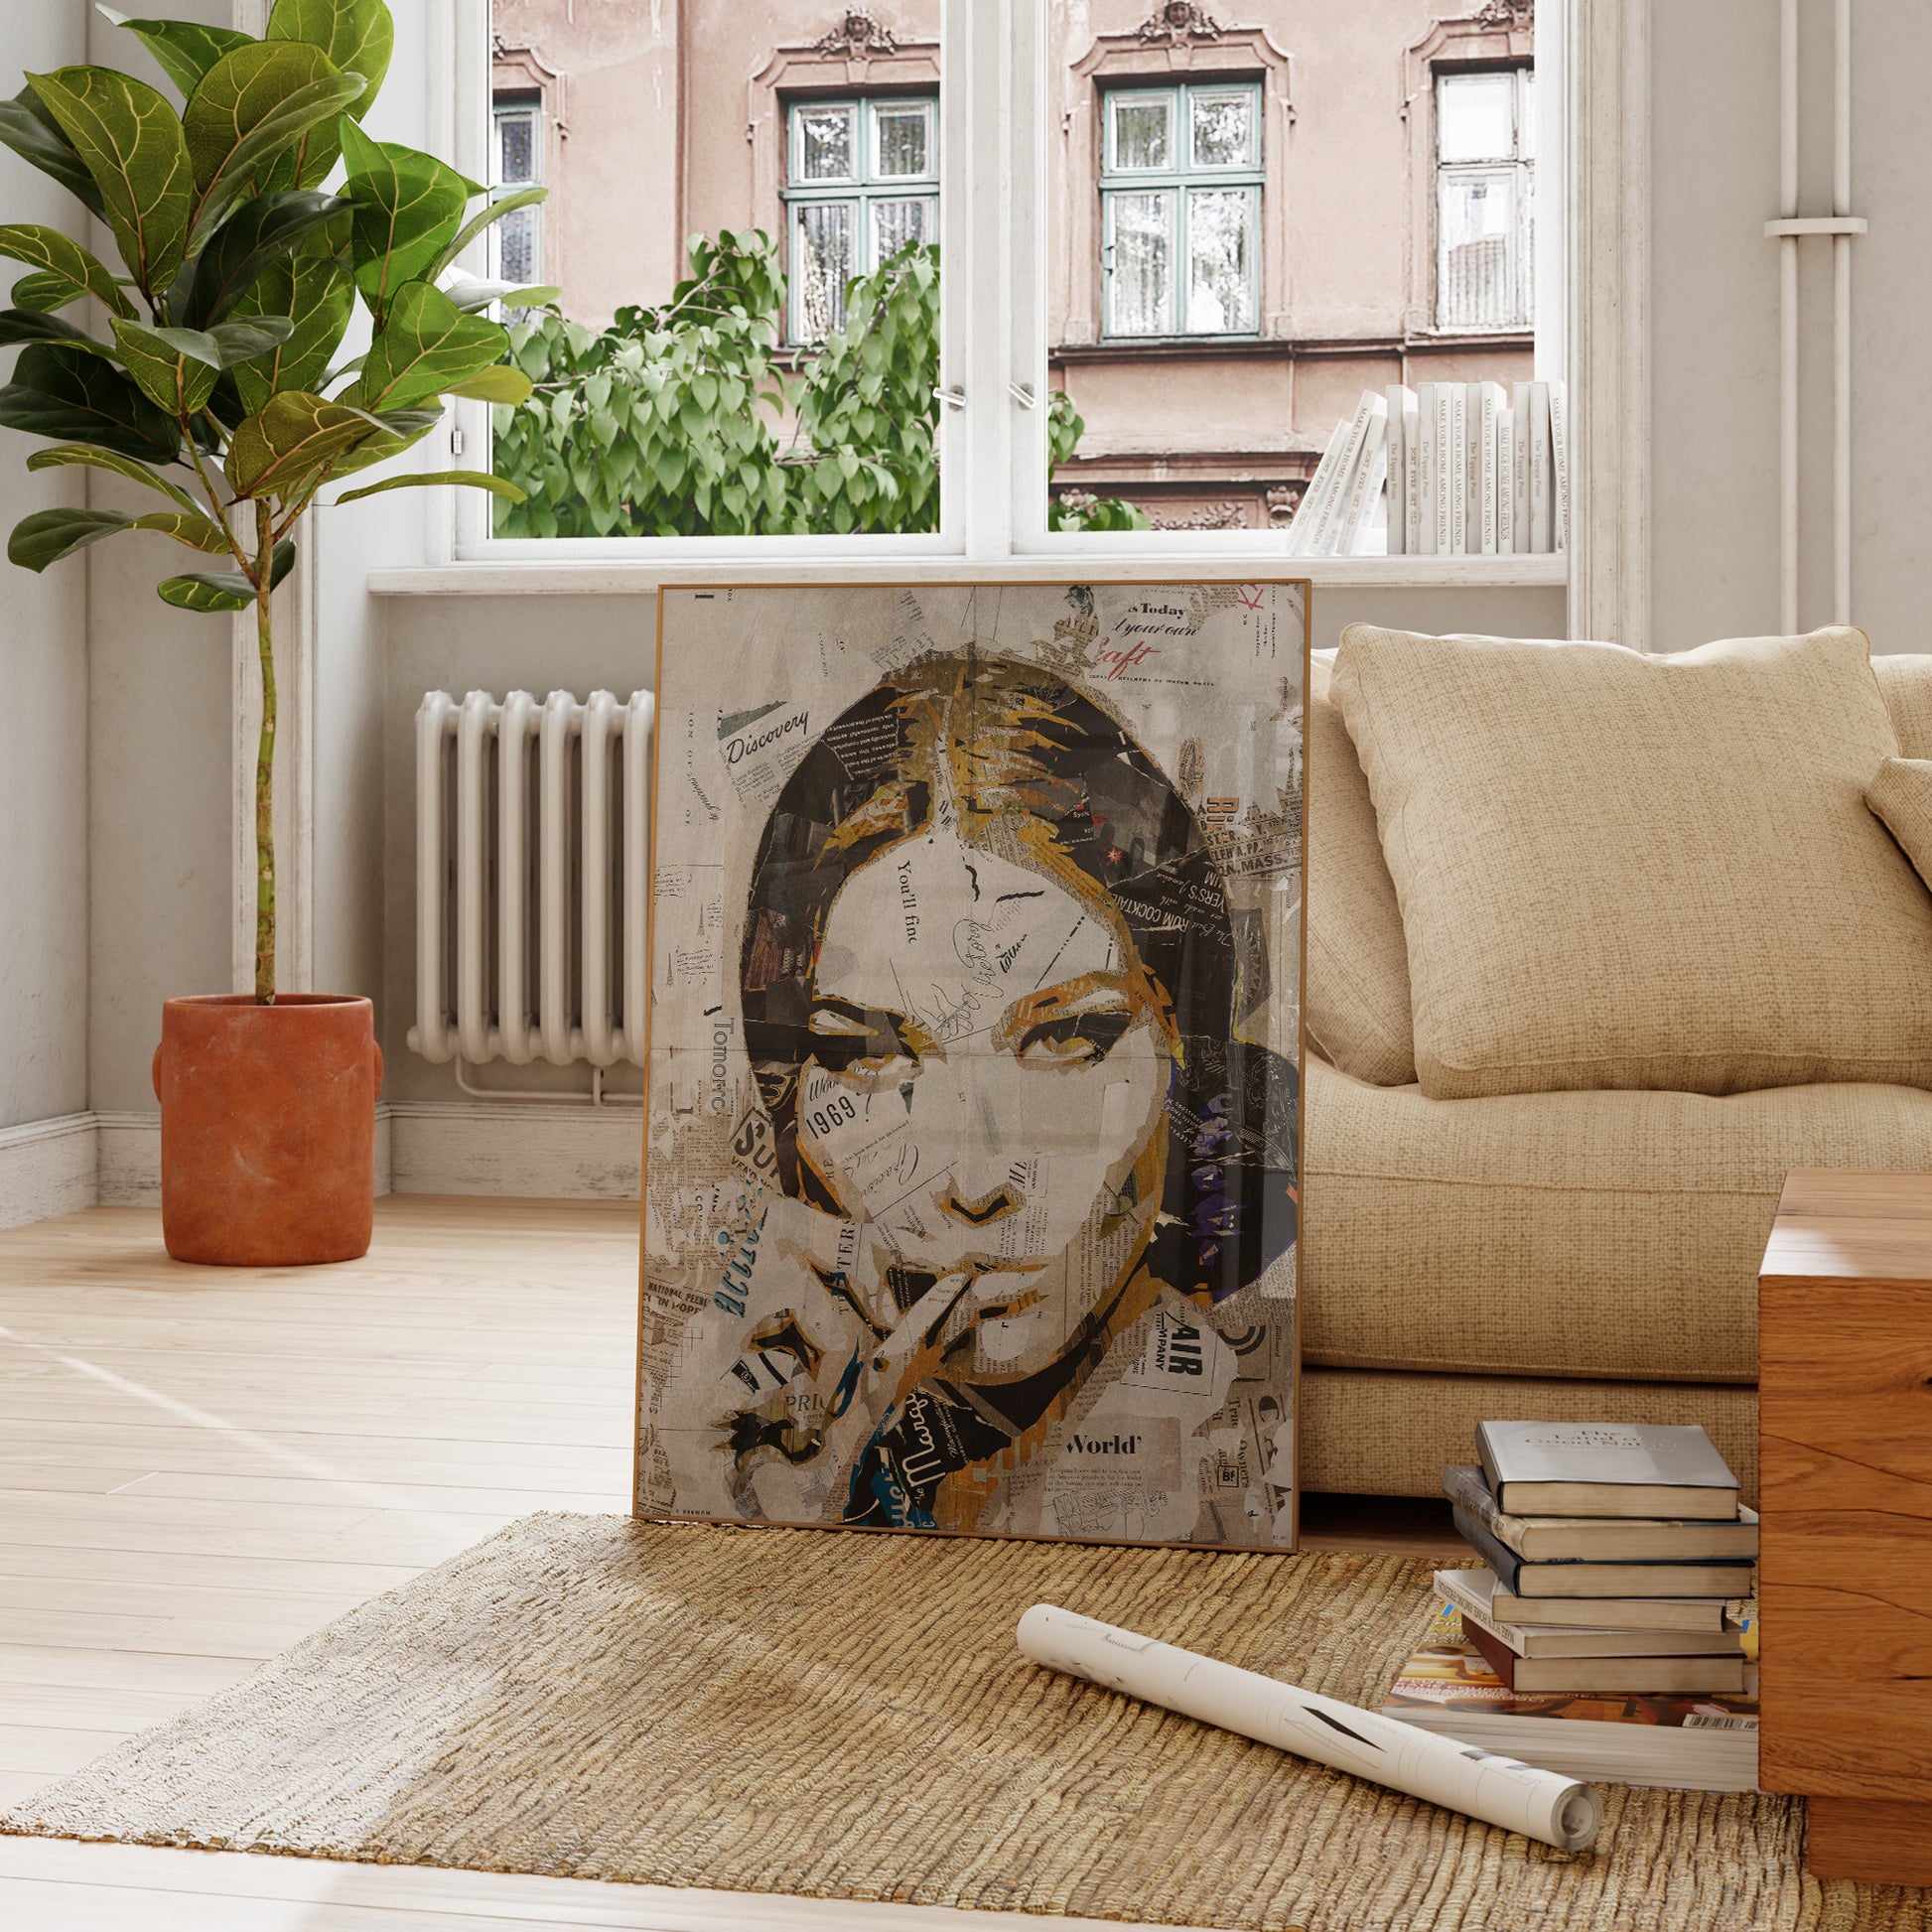 Be inspired by our iconic collage portrait art print of Carla Bruni. This artwork was printed using the giclée process on archival acid-free paper and is presented in a French living room, capturing its timeless beauty in every detail.